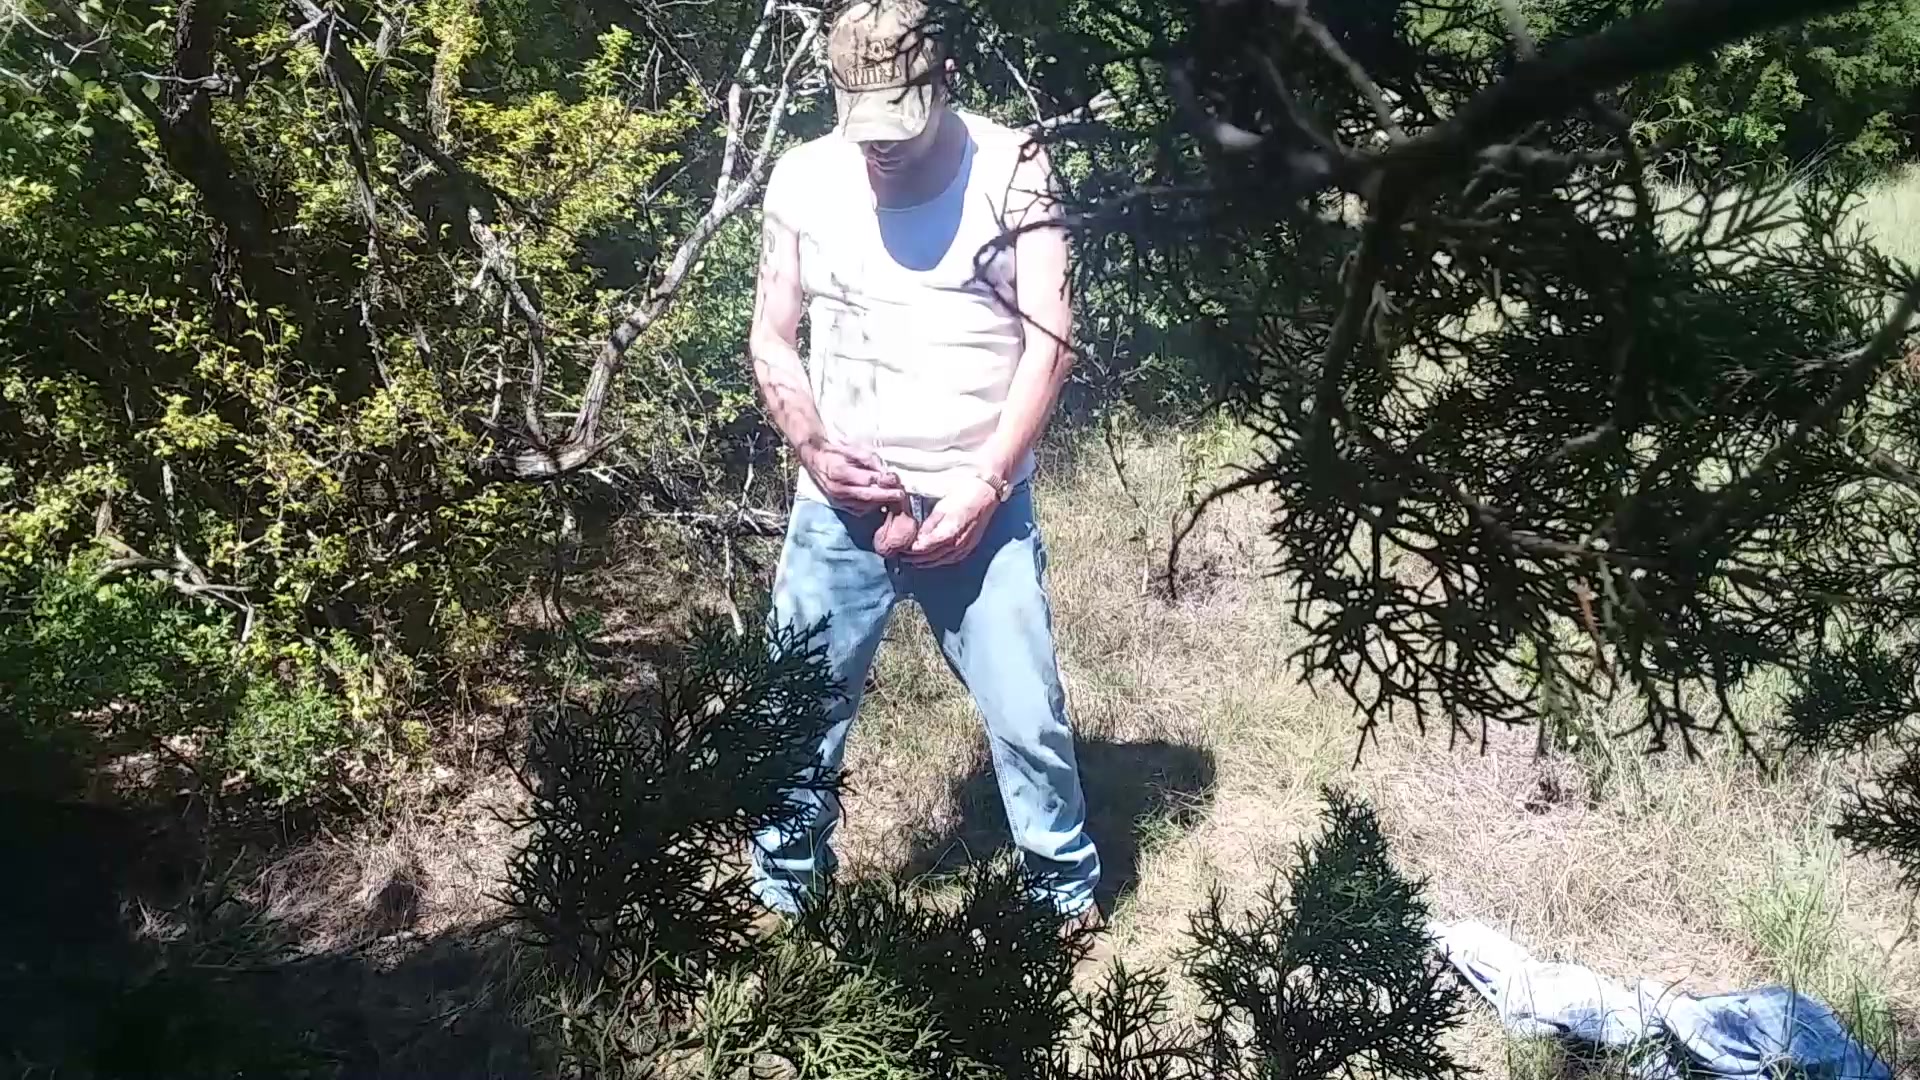 Drinkin piss and shitting in the woods